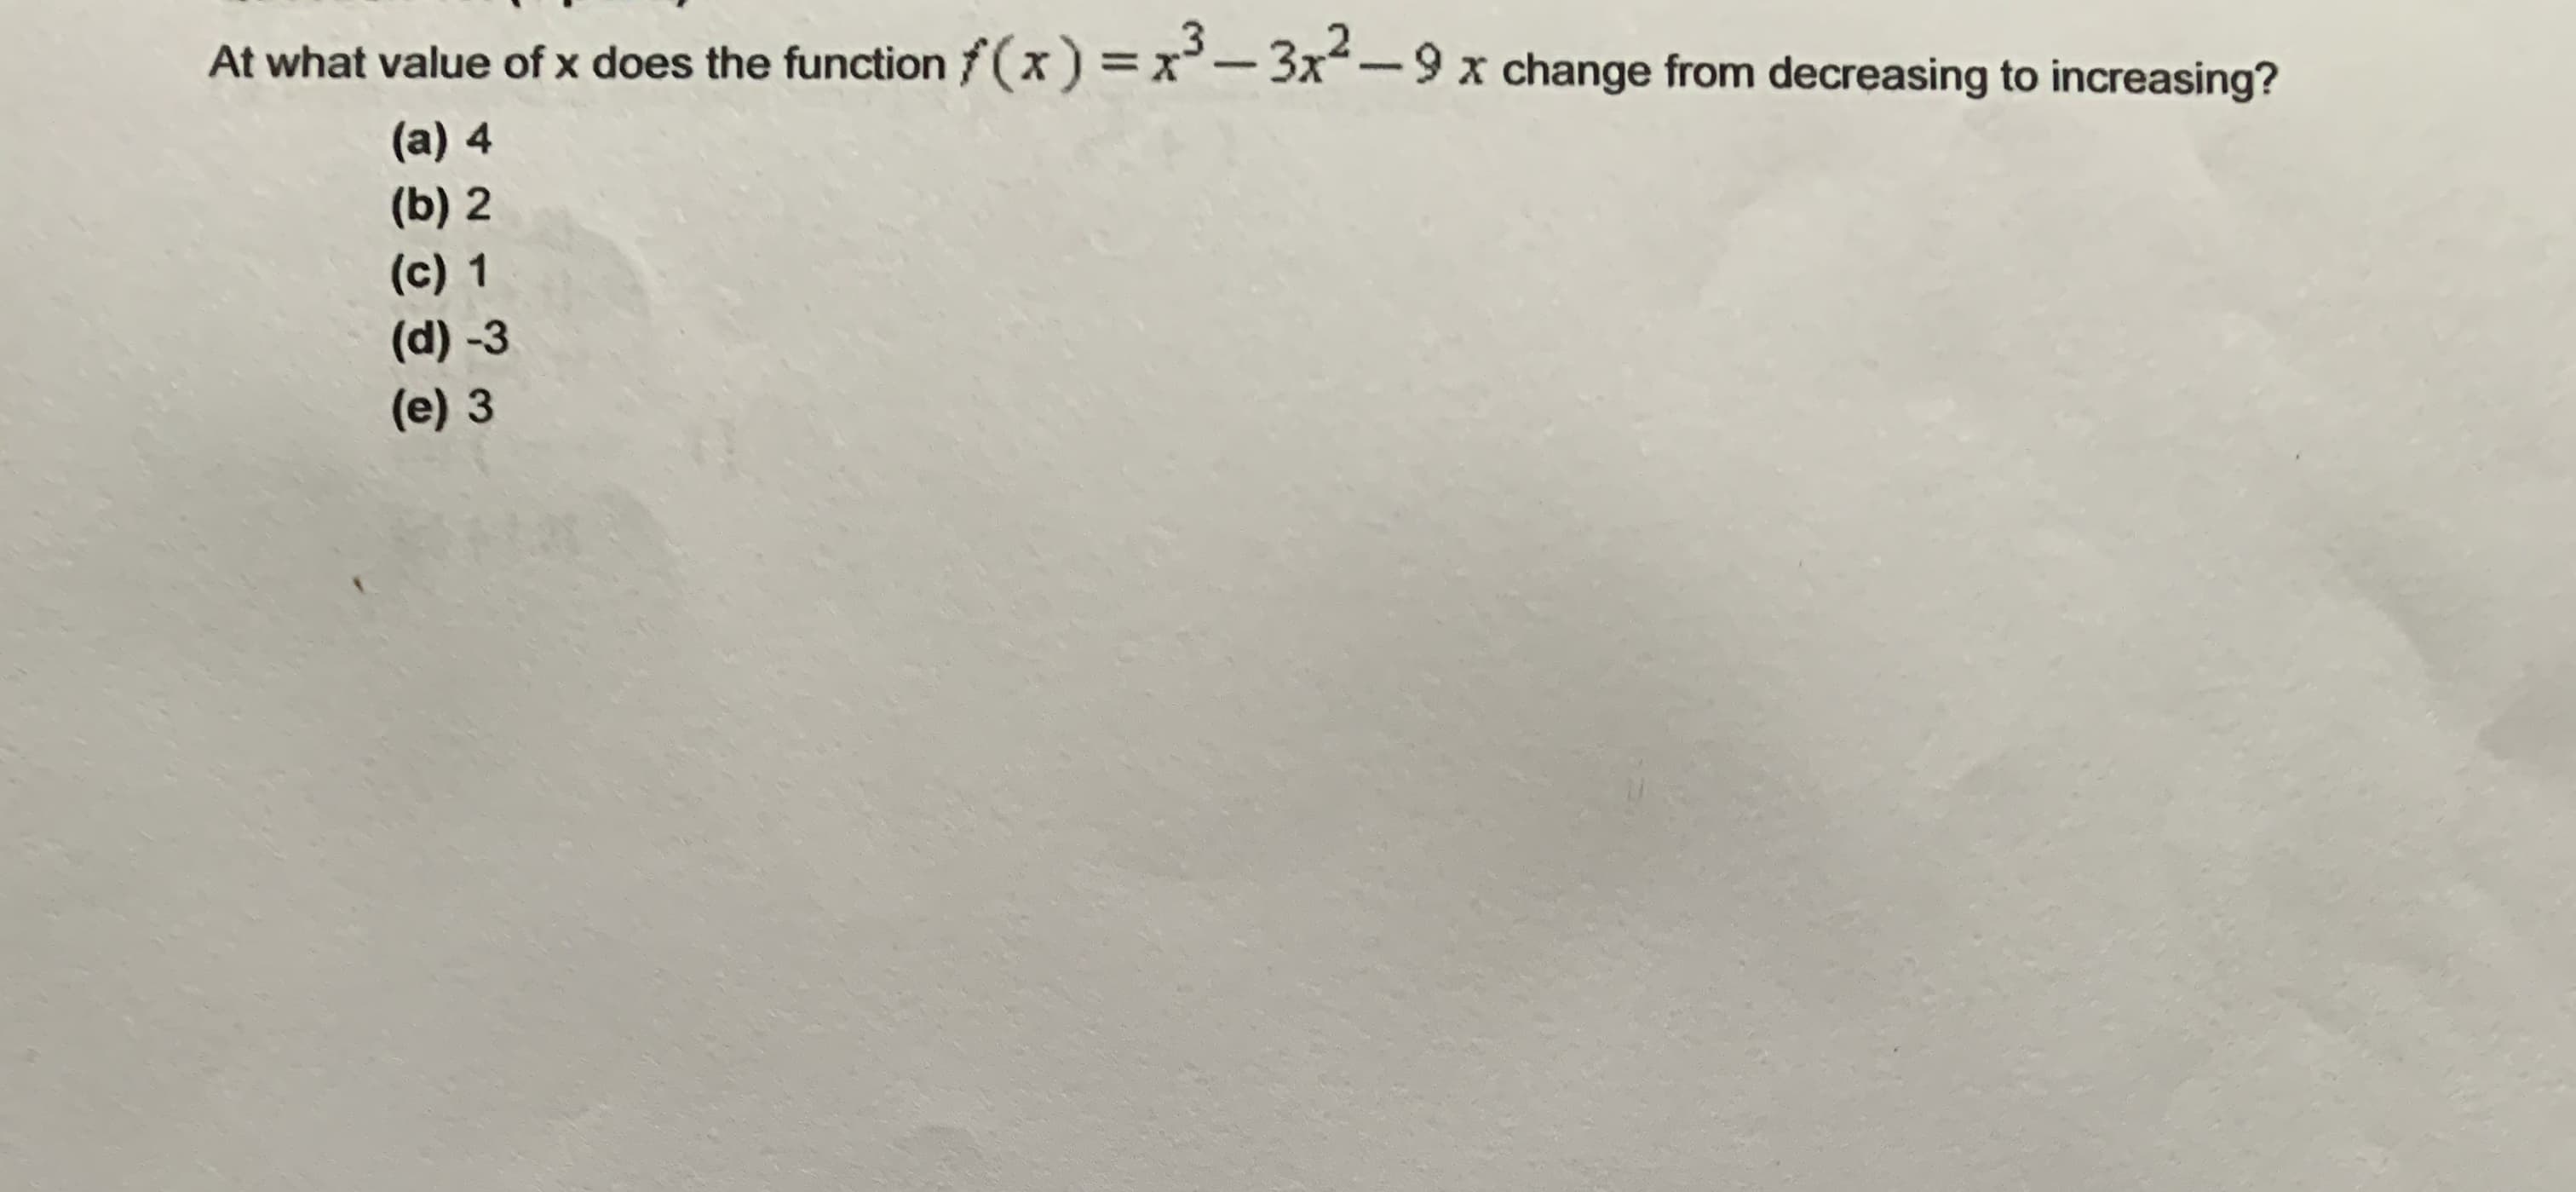 At what value of x does the functionf(x) =x-3x²-9 x change from decreasing to increasing?
(a) 4
(b) 2
(c) 1
(d) -3
(e) 3
